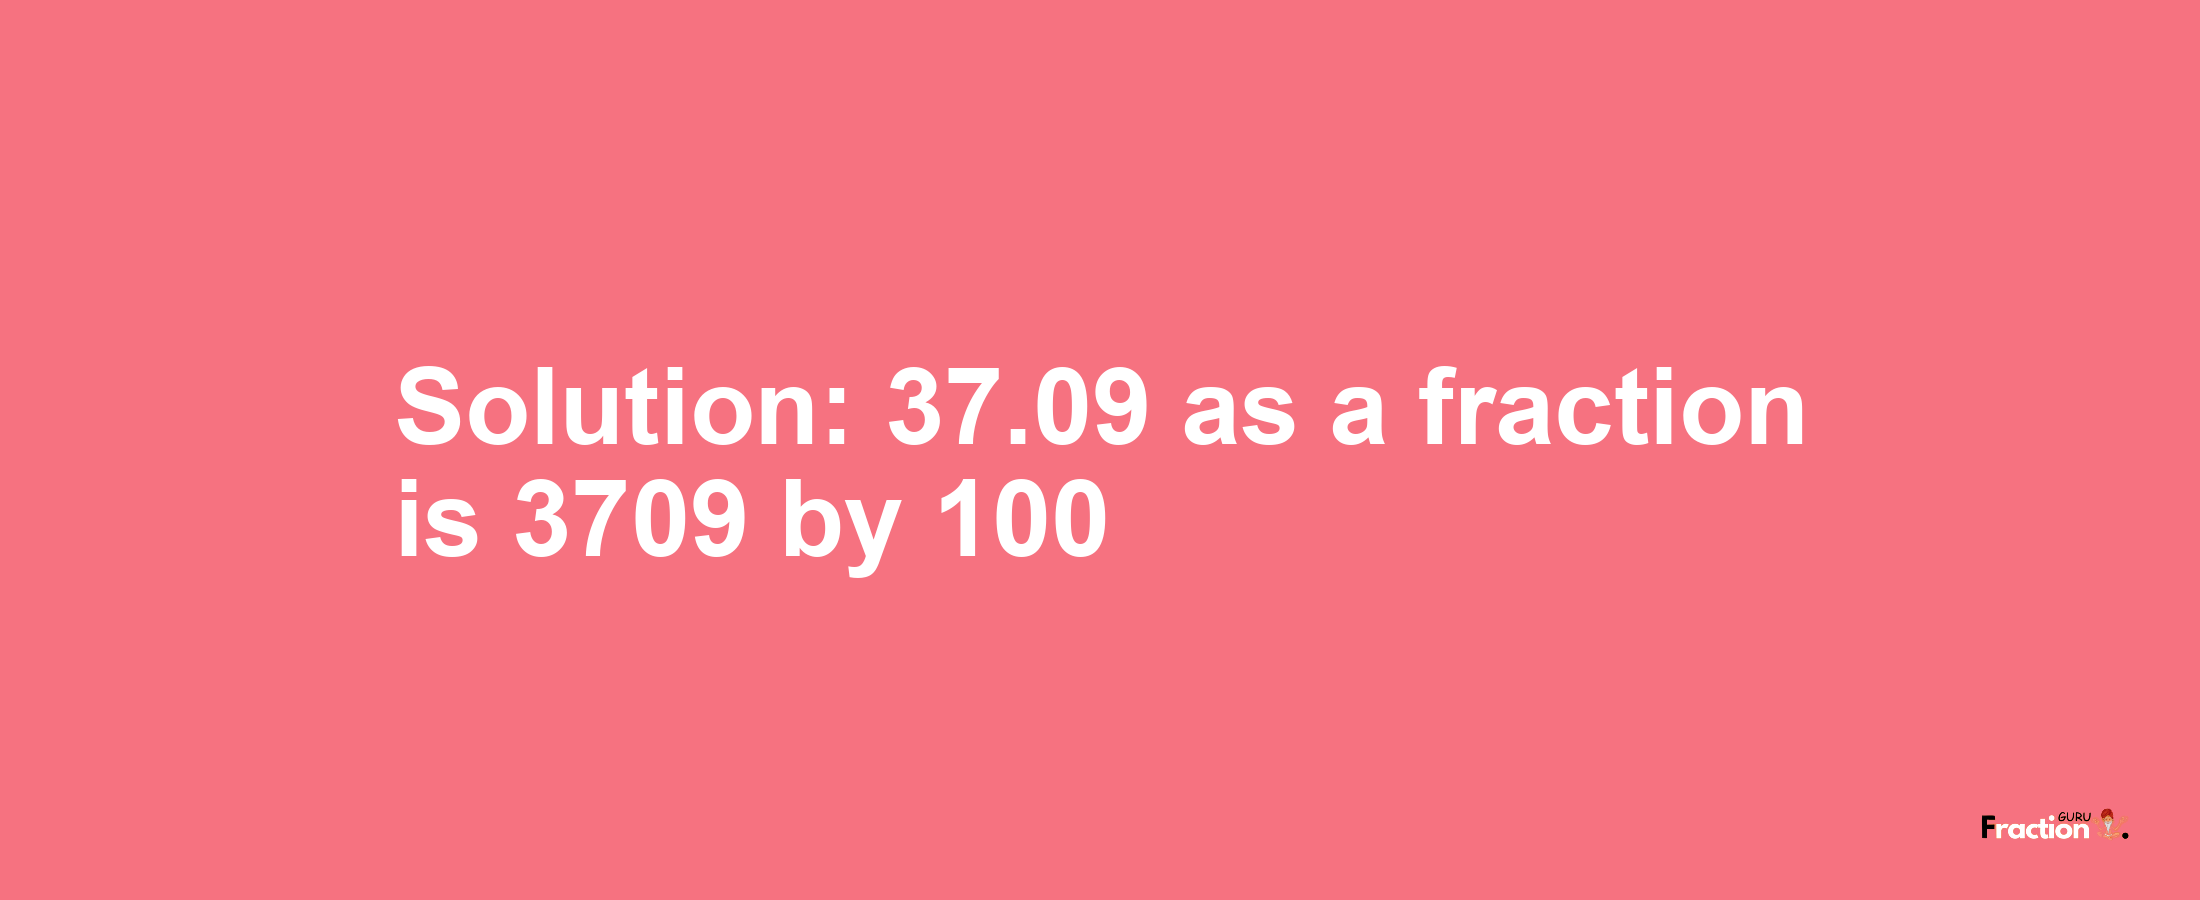 Solution:37.09 as a fraction is 3709/100